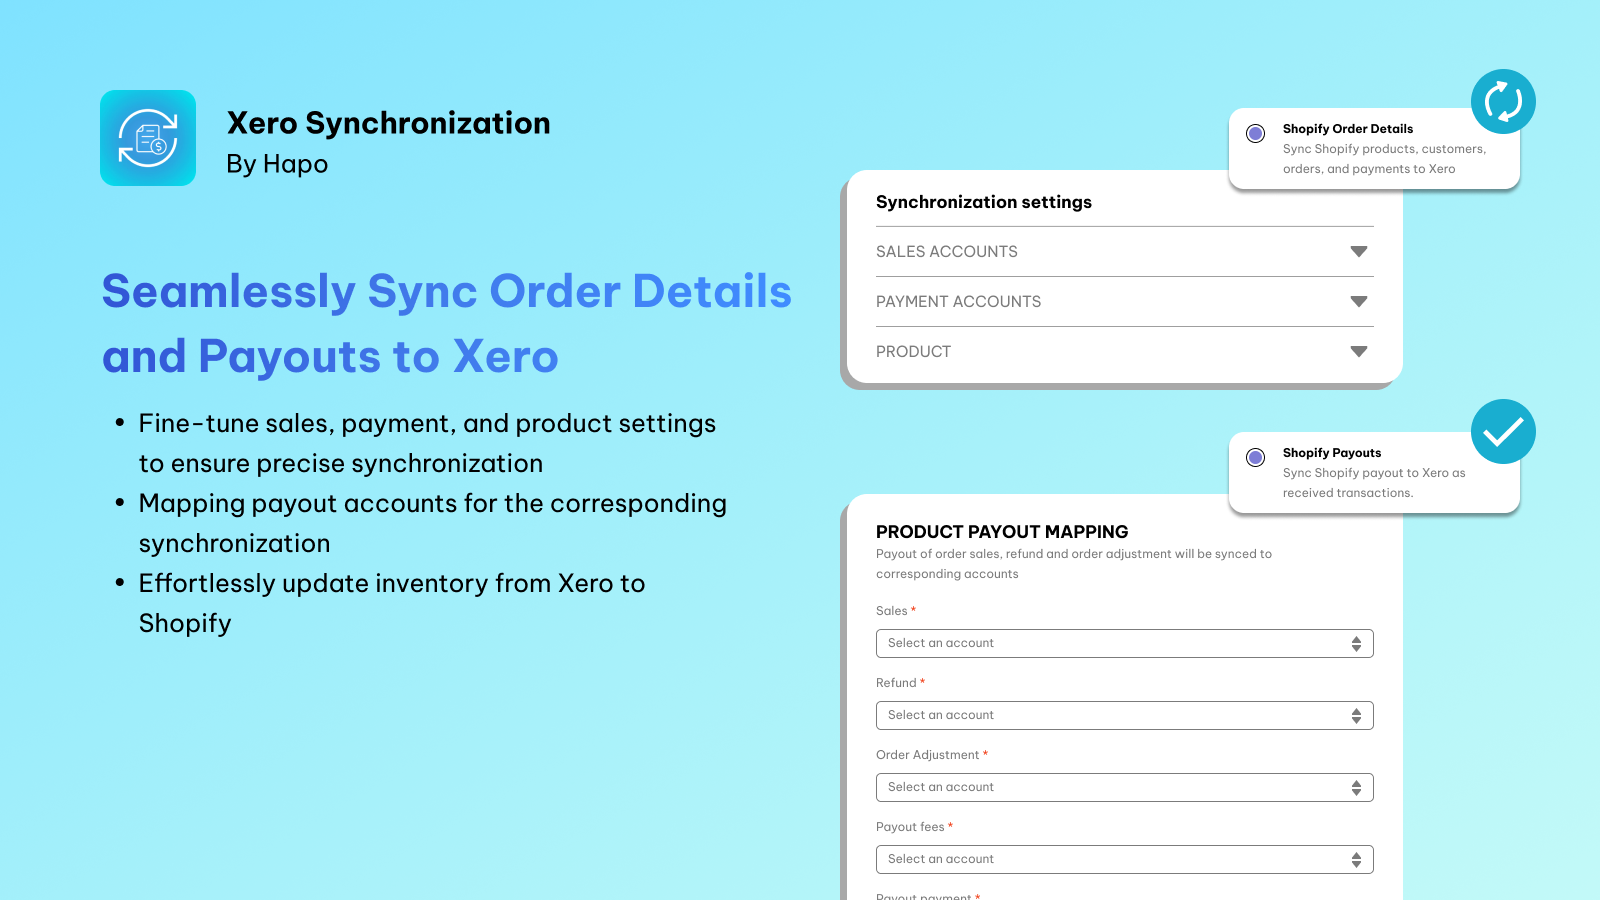 Seamlessly Sync Order Details and Payouts to Xero.